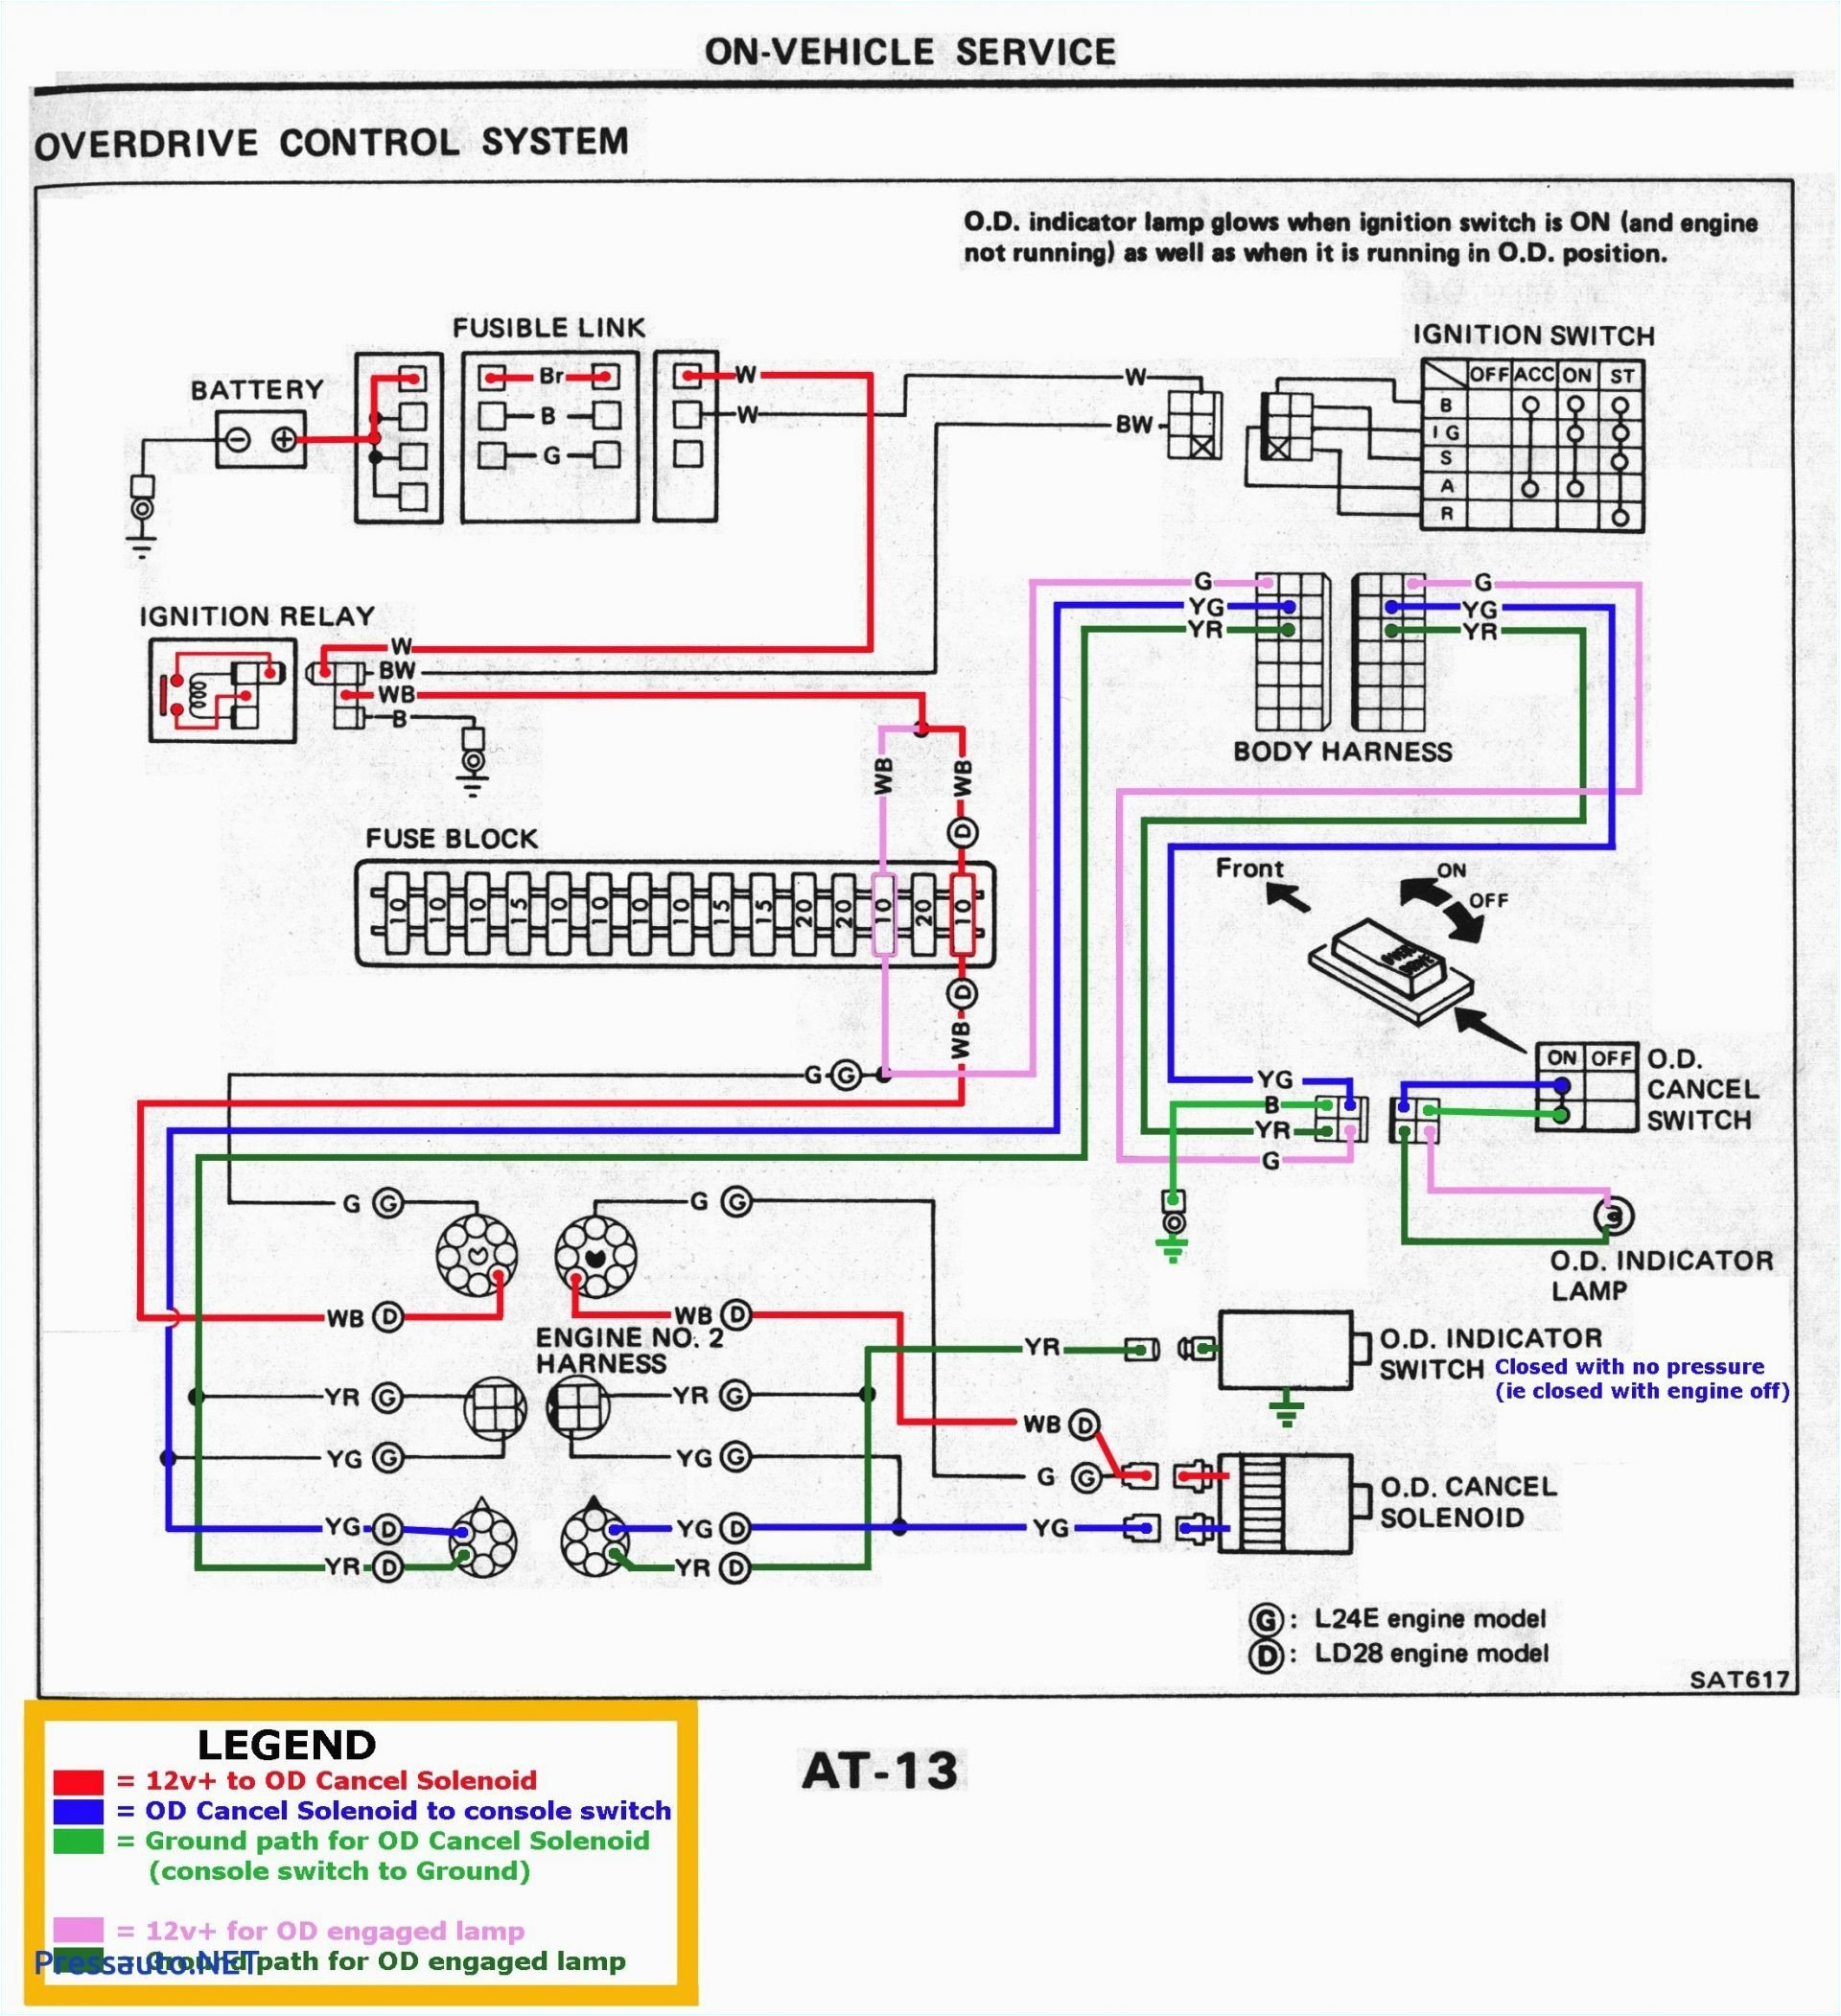 ultra remote start wiring diagram wiring diagram4105 viper remote start wiring diagrams wiring diagram library4105 viper